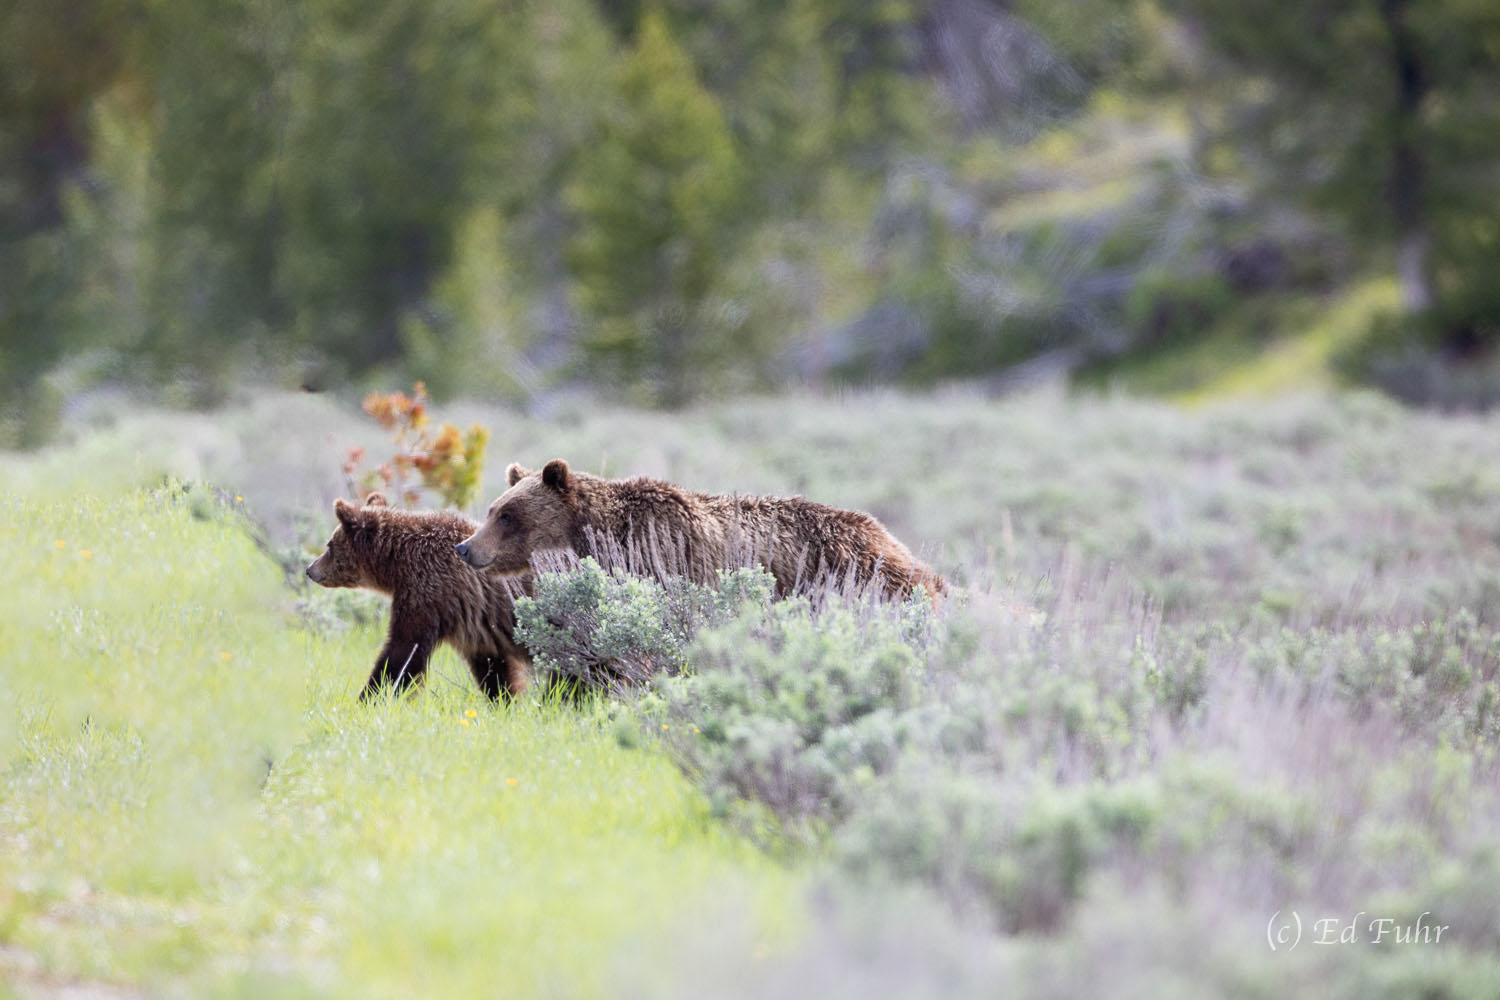 Grizzly 610 and one of her three cubs emerge from the sage flats.